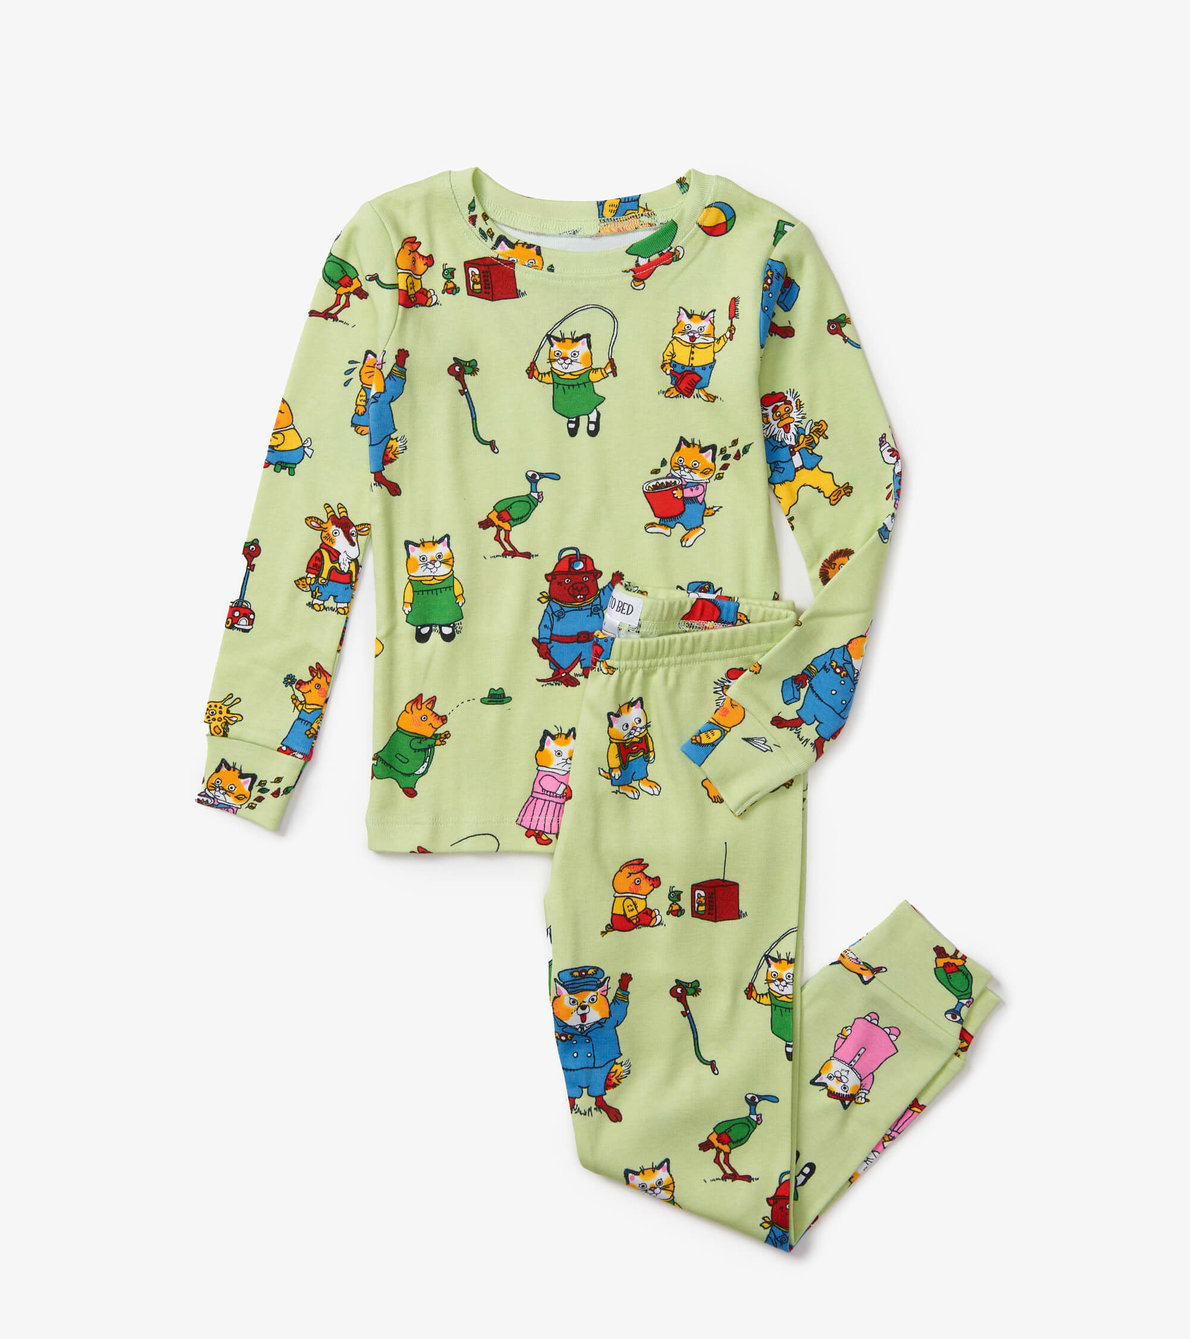 View larger image of Richard Scarry's Busy World Pajama Set